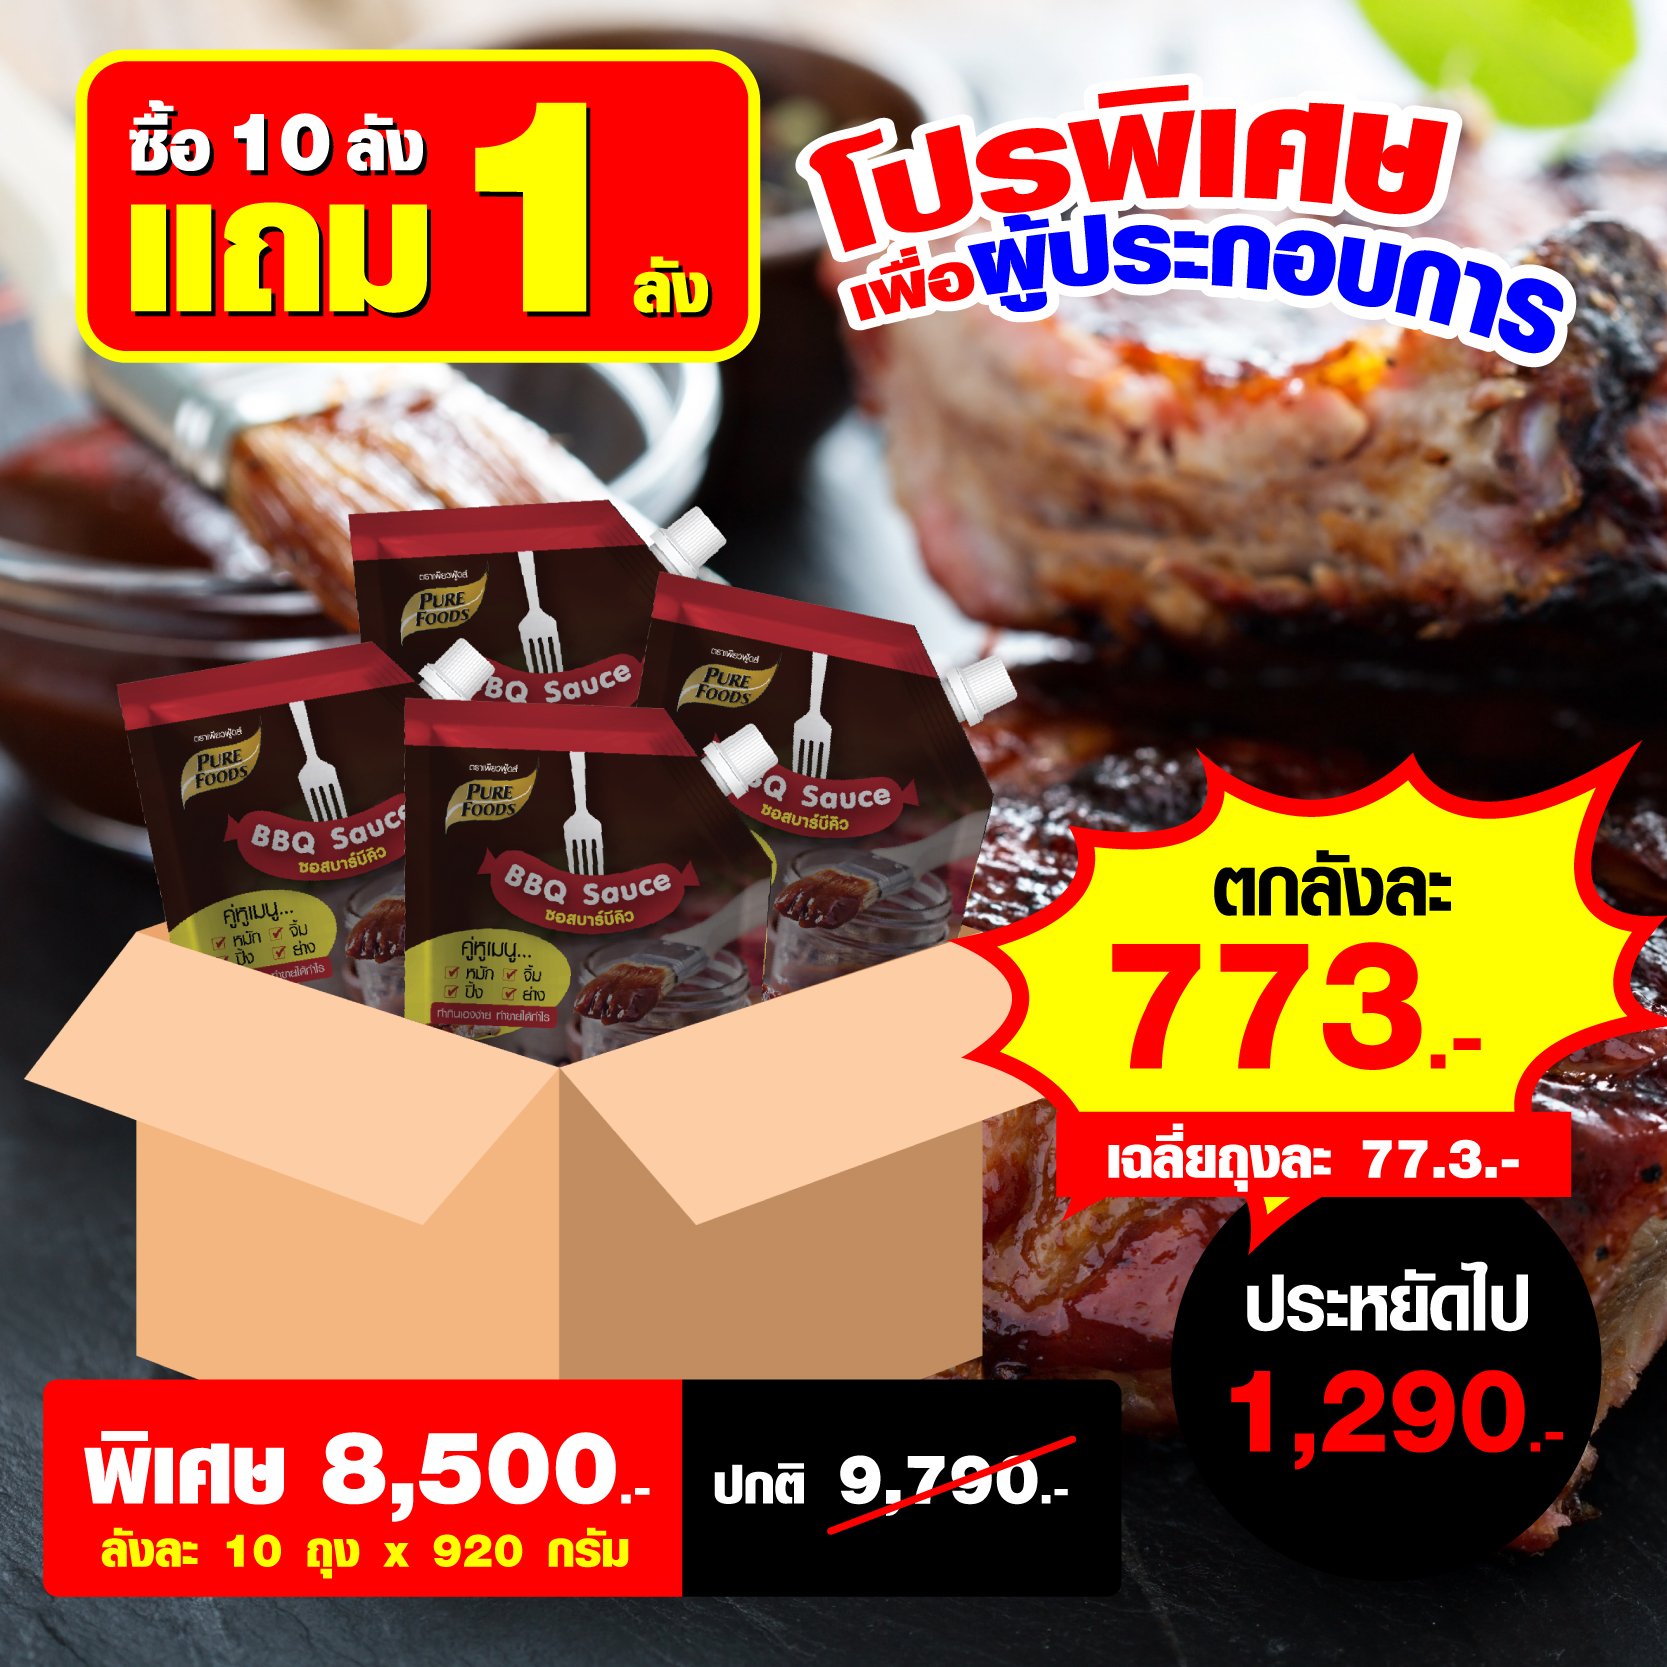 Barbecue (BBQ) Sauce 920 g. (Buy 12 Get 1 Free and Free Delivery in Thailand)